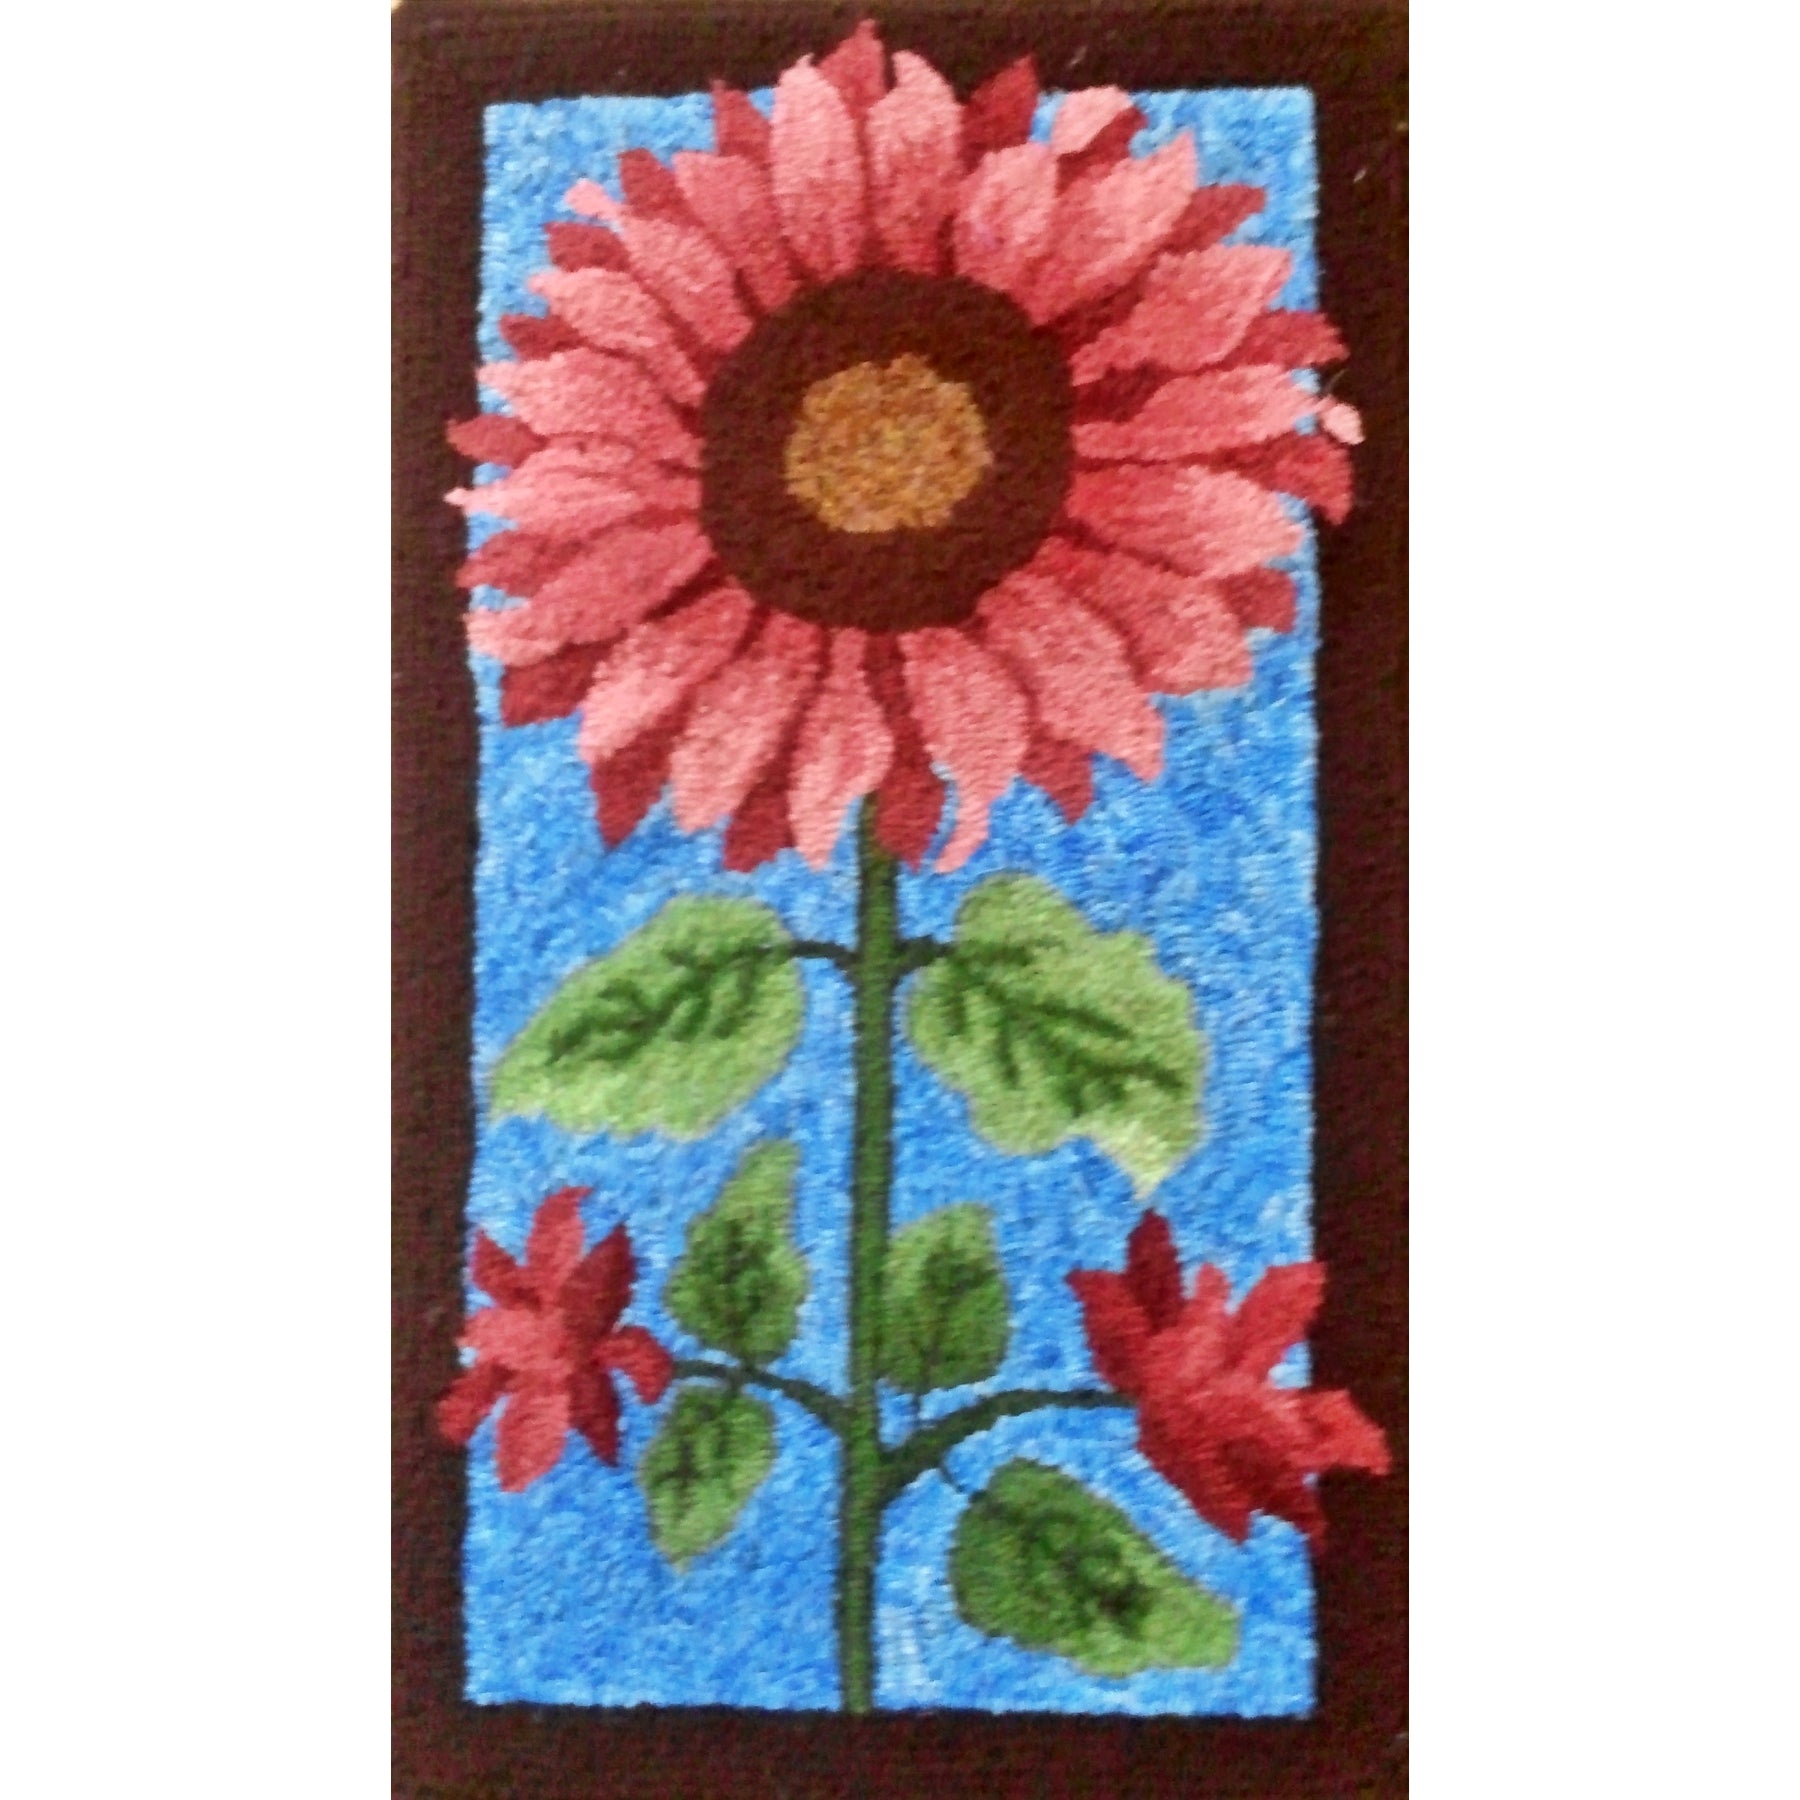 Sunflower, rug hooked by Kathryn Fleming Kovaric